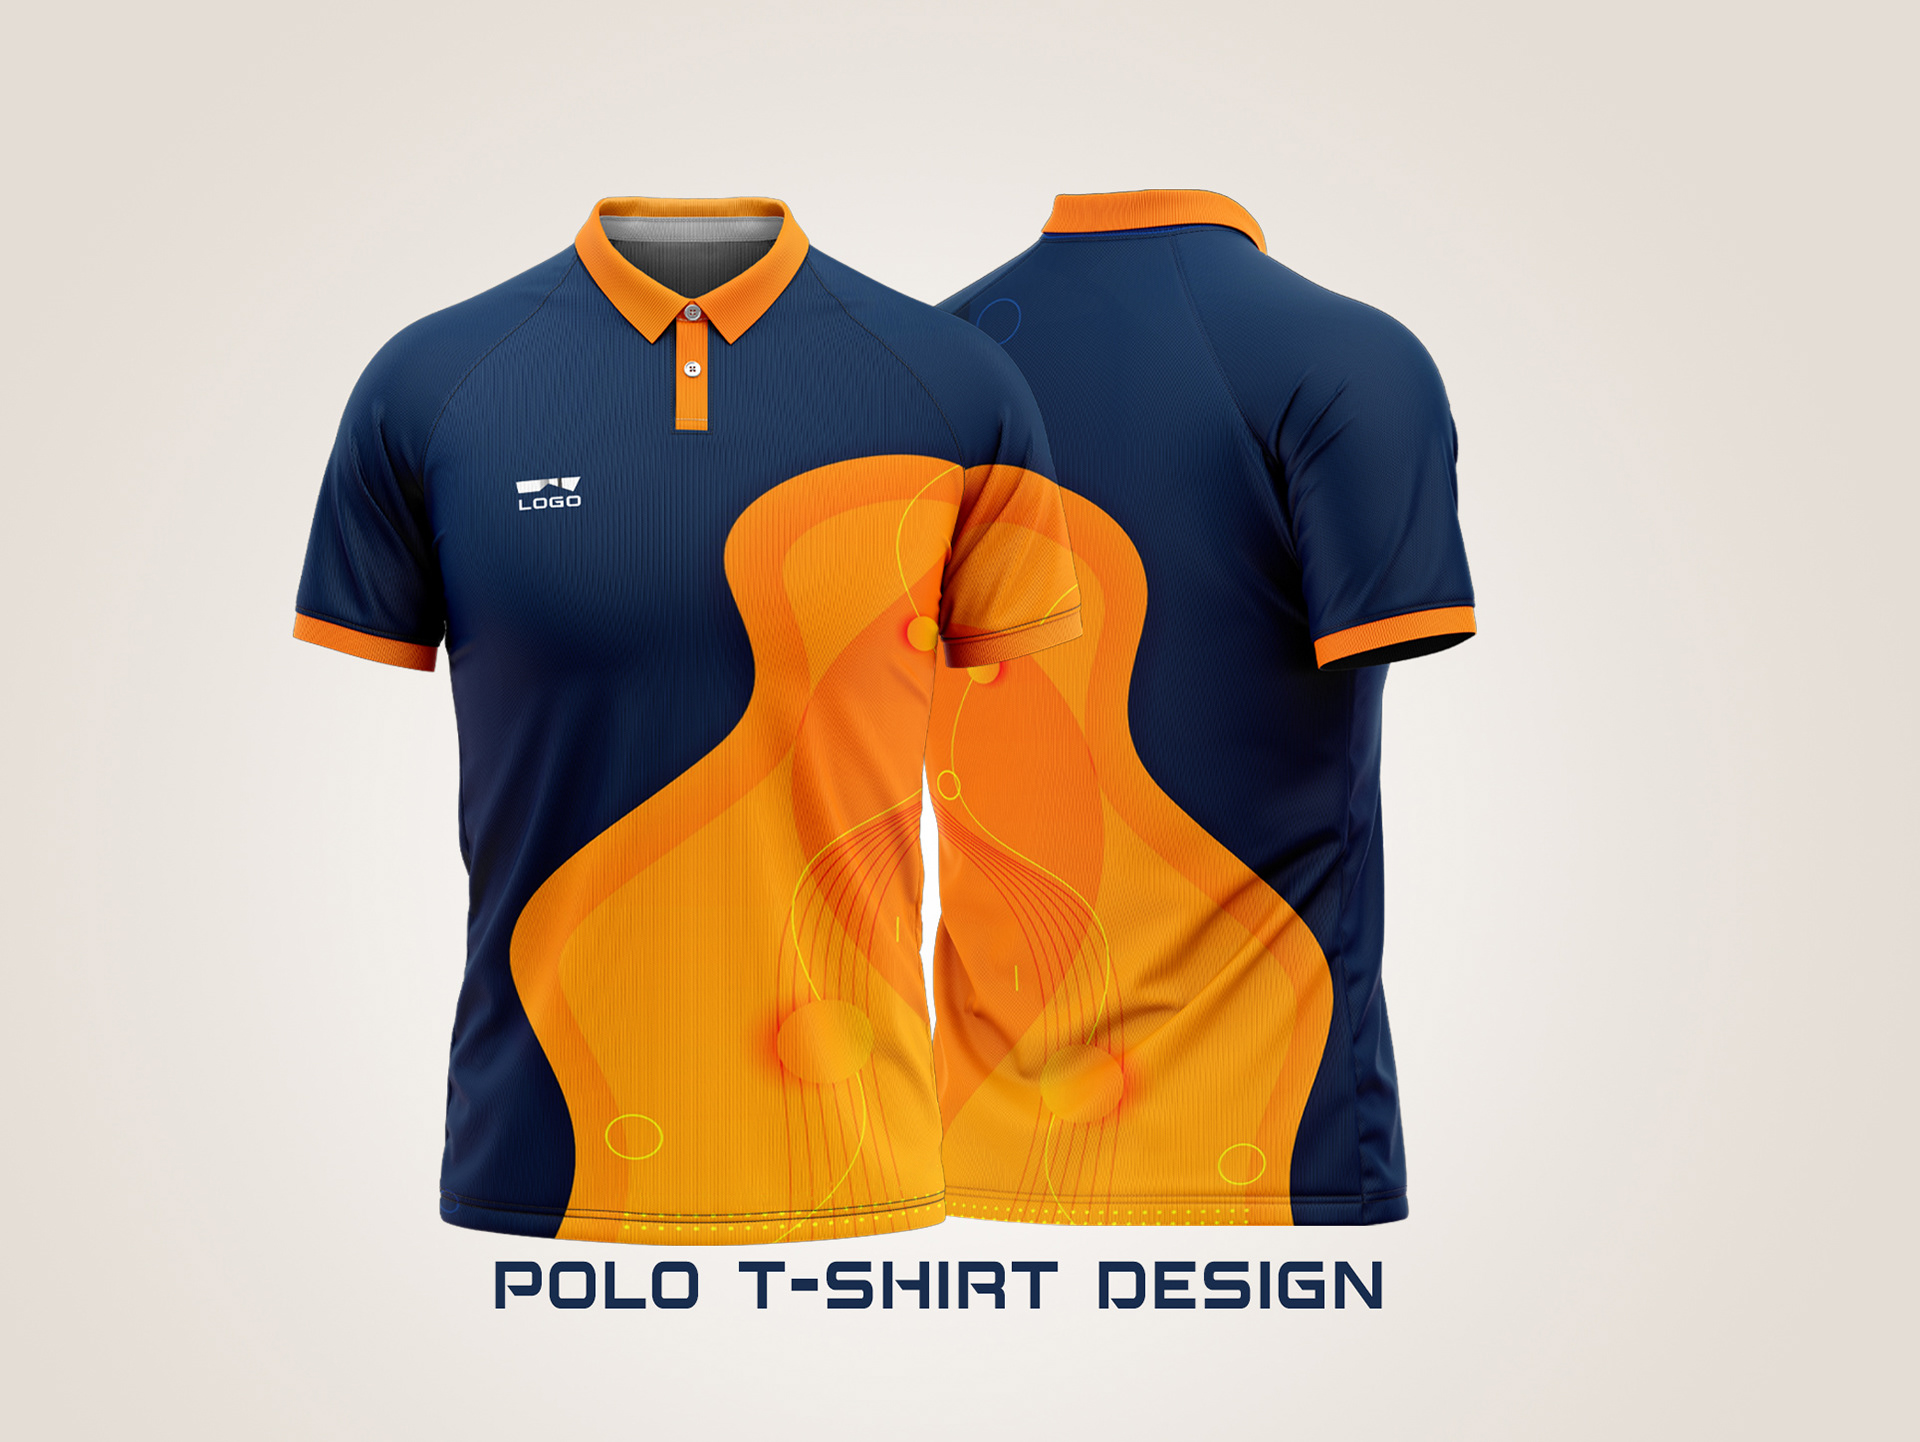 Polo T-Shirt Design Front And Back Part Design on Behance